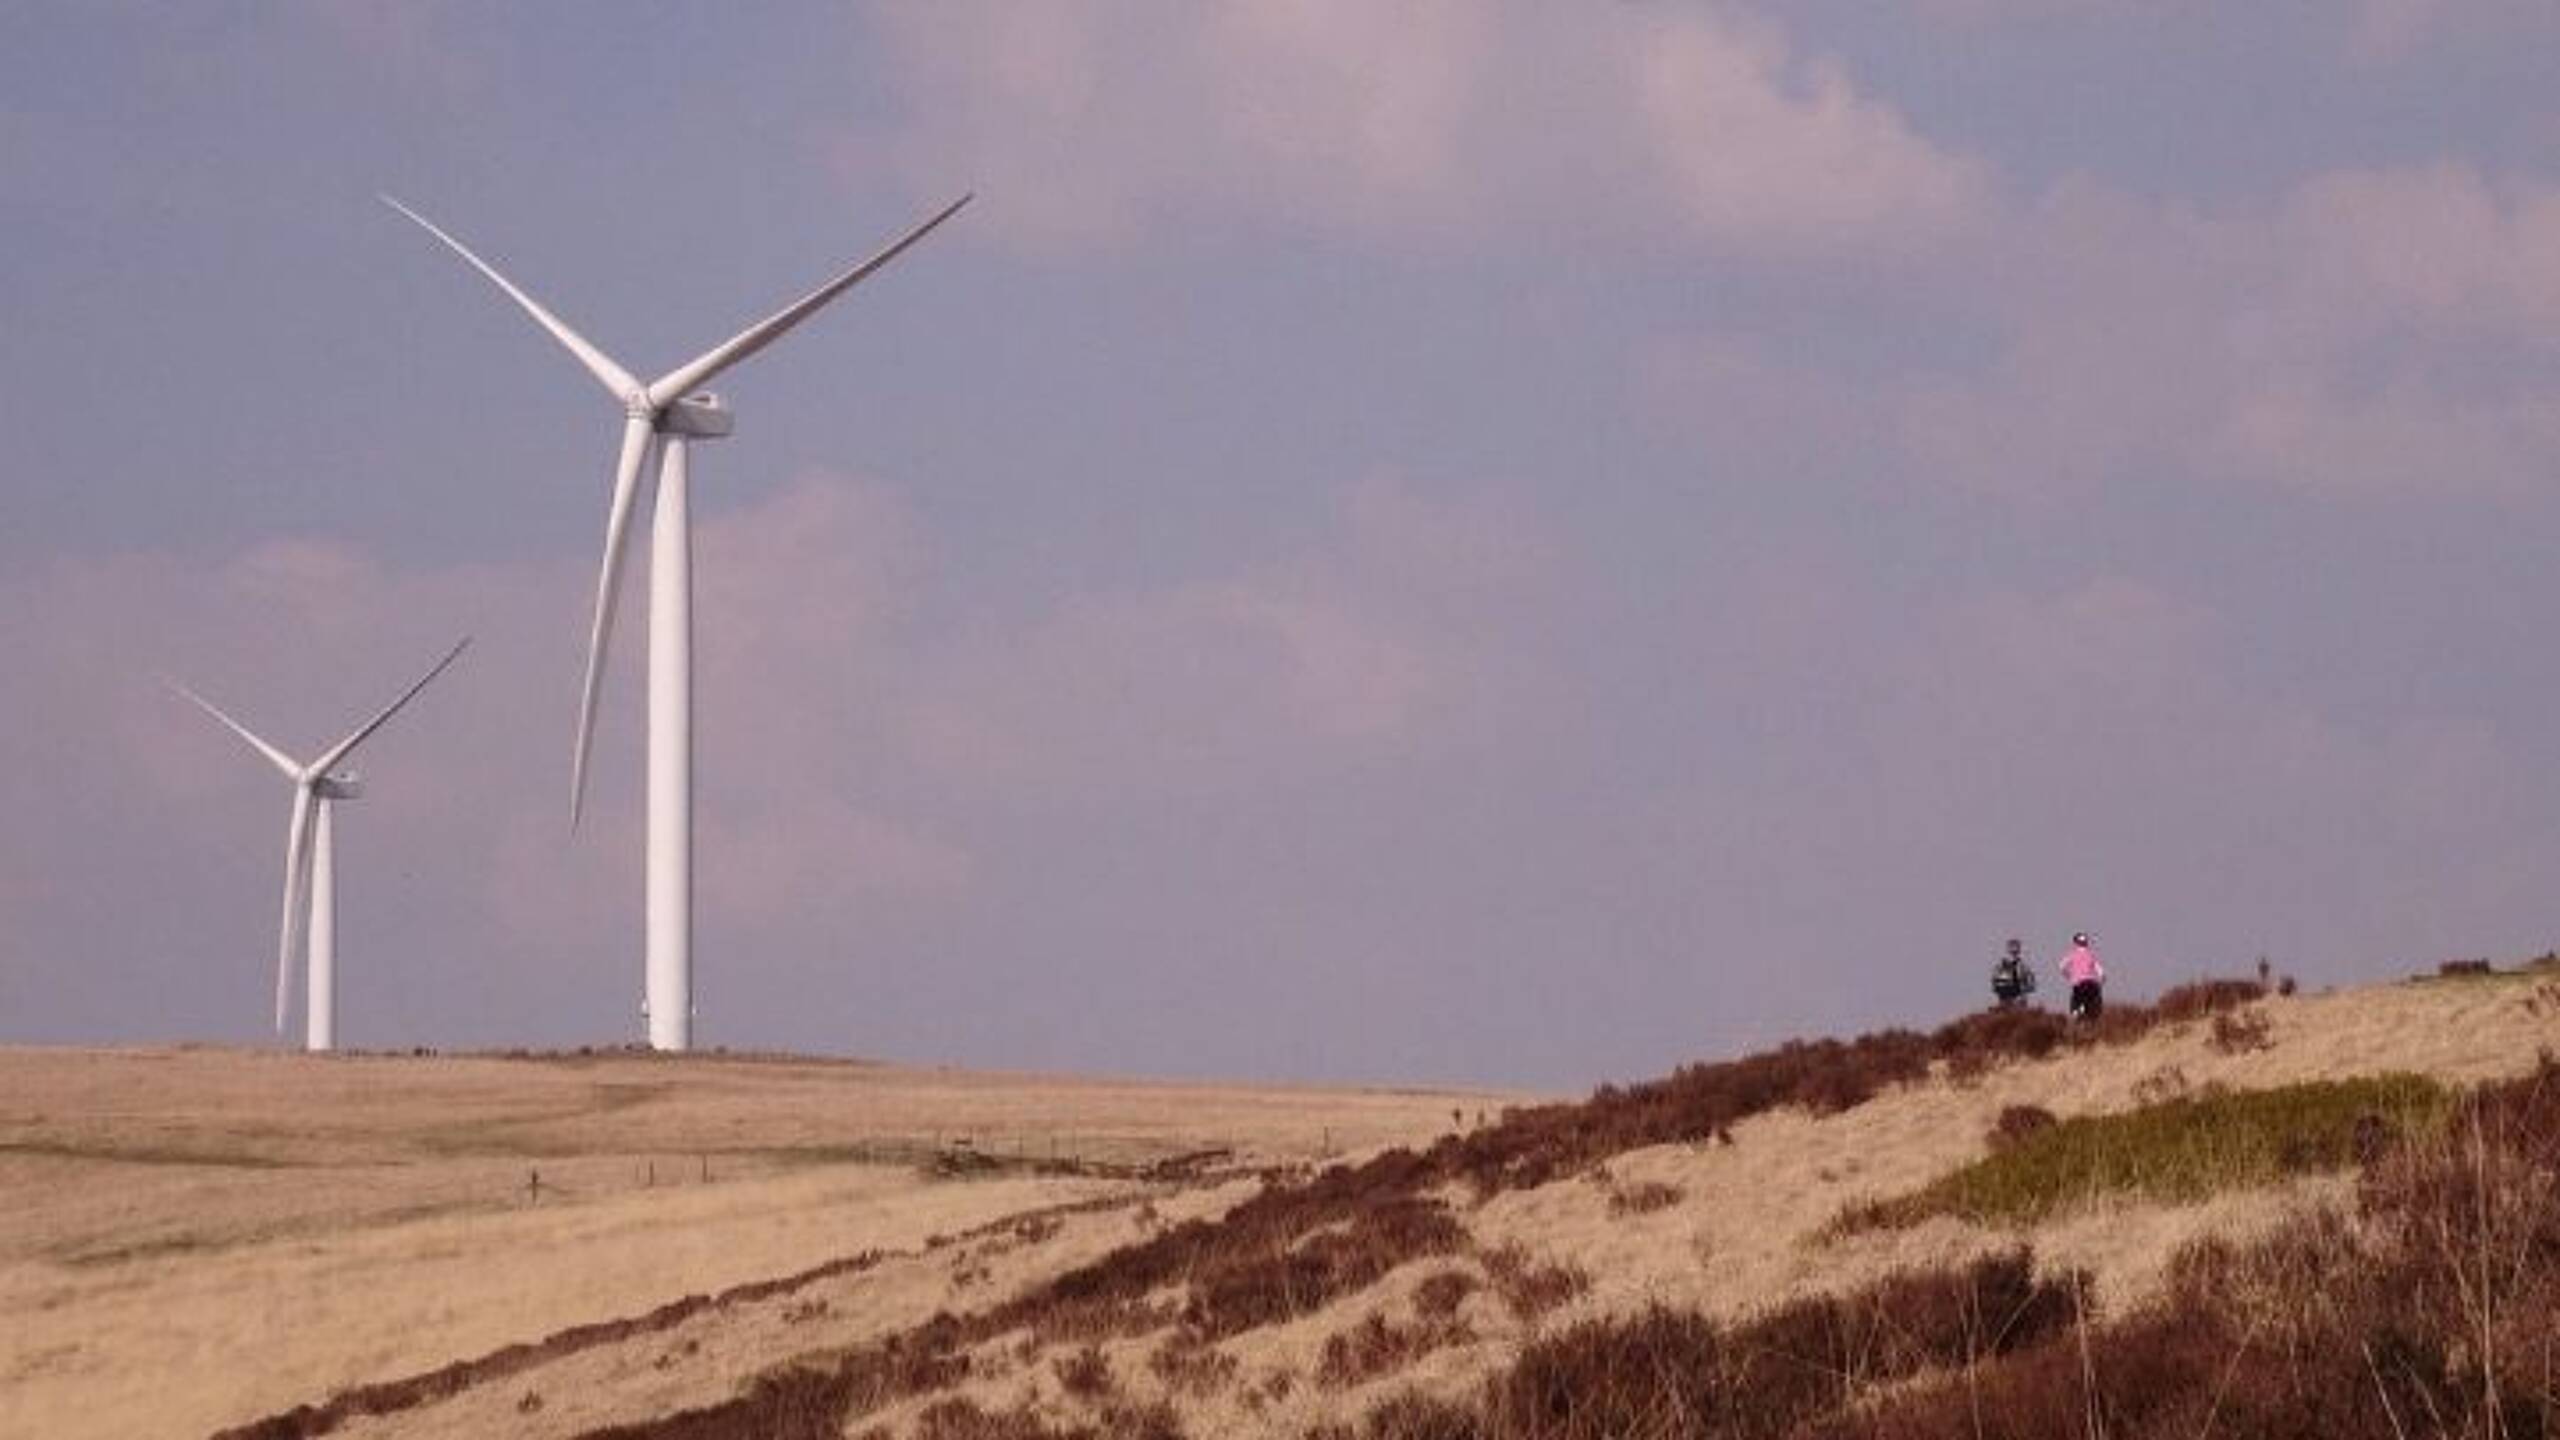 Planning for the future: How onshore wind farm planning can work for all